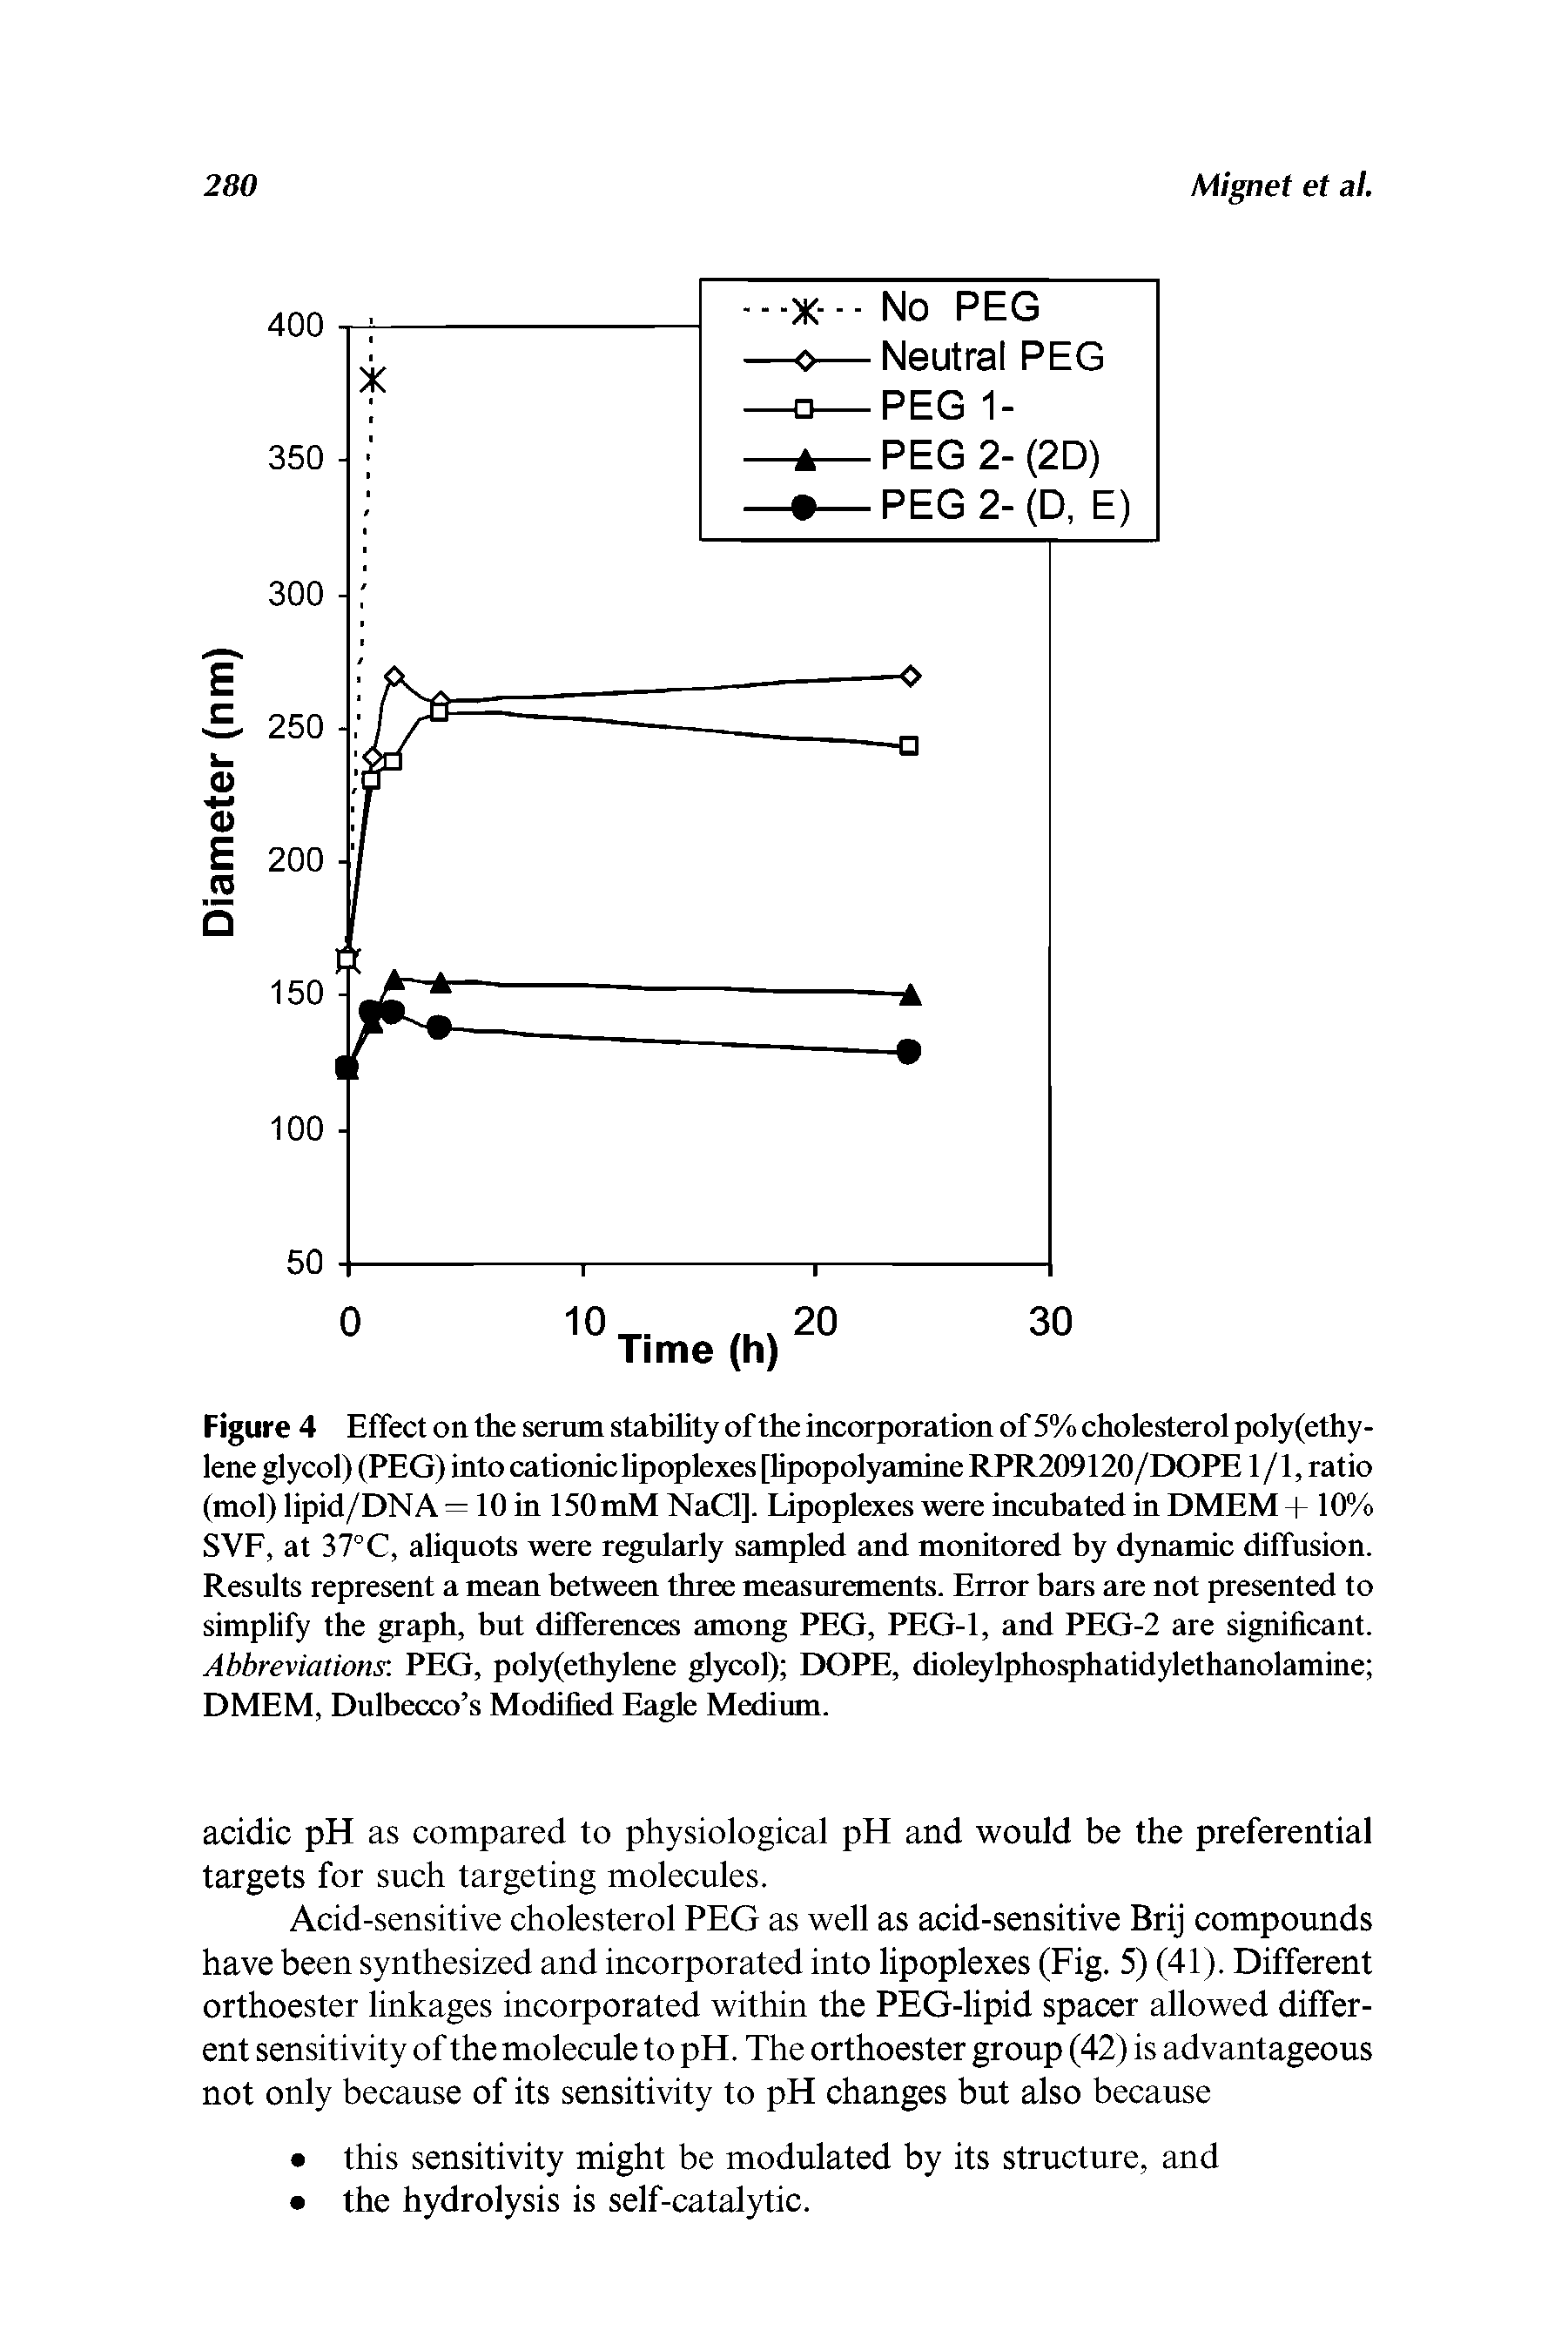 Figure 4 Effect on the serum stability of the incorporation of 5% cholesterol poly(ethy-lene glycol) (PEG) into cationic lipoplexes [hpopolyamine RPR209120/DOPE1/1, ratio (mol) lipid/DNA = 10 in 150 mM NaCl]. Lipoplexes were incubated in DMEM + 10% SVF, at 37°C, aliquots were regularly sampled and monitored by dynamic diffusion. Results represent a mean between three measurements. Error bars are not presented to simplify the graph, but differences among PEG, PEG-1, and PEG-2 are significant. Abbreviations PEG, poly(ethylene glycol) DOPE, dioleylphosphatidylethanolamine DMEM, Dulbecco s Modified Eagle Medium.